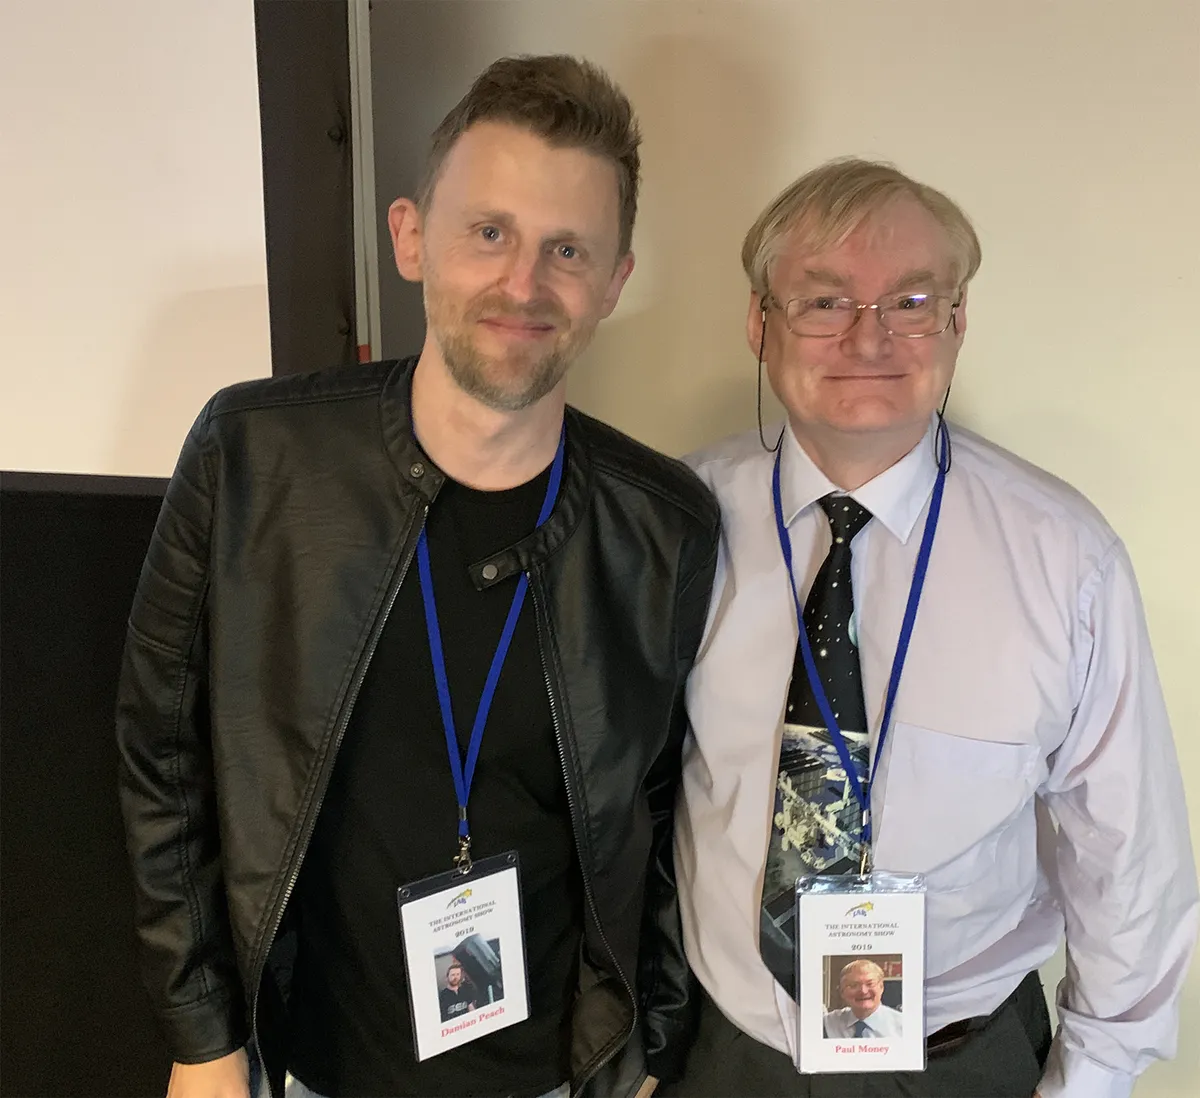 Paul pictured with astrophotographer Damian Peach